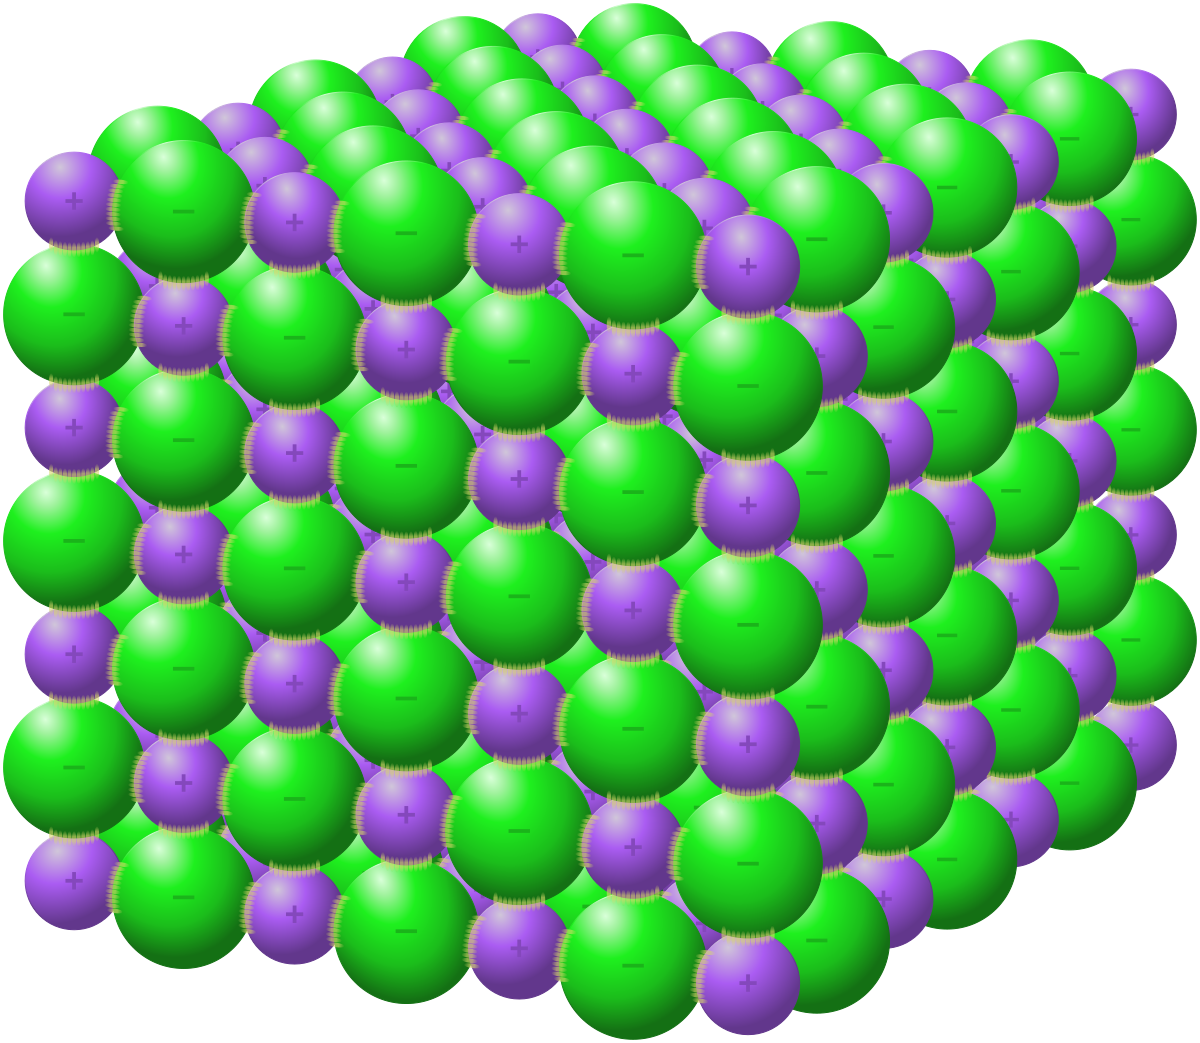 <p><strong>Structural Particles:</strong> Alternating cations (+ve) and anions (-ve)</p><p><strong>Intramolecular Force:</strong> Ionic bonds (strong, <u>directional</u>)</p><p><strong>Intermolecular Force:</strong> ION-ION electrostatic force</p><ul><li><p><u>Hardness</u>: Very hard, resists scratching and denting</p></li><li><p><u>Melting Point</u>: Moderate to very high (~1000°C)</p></li><li><p><u>Electrical Conductivity</u>: NO as solid; YES when aqueous and molten</p></li><li><p><u>Solubility</u>: NO in oil; MANY in water → mobbed</p></li><li><p><u>Brittleness</u>: <strong>Very brittle</strong>, easily broken apart (like charges come into contact, repel and break apart)</p></li></ul>